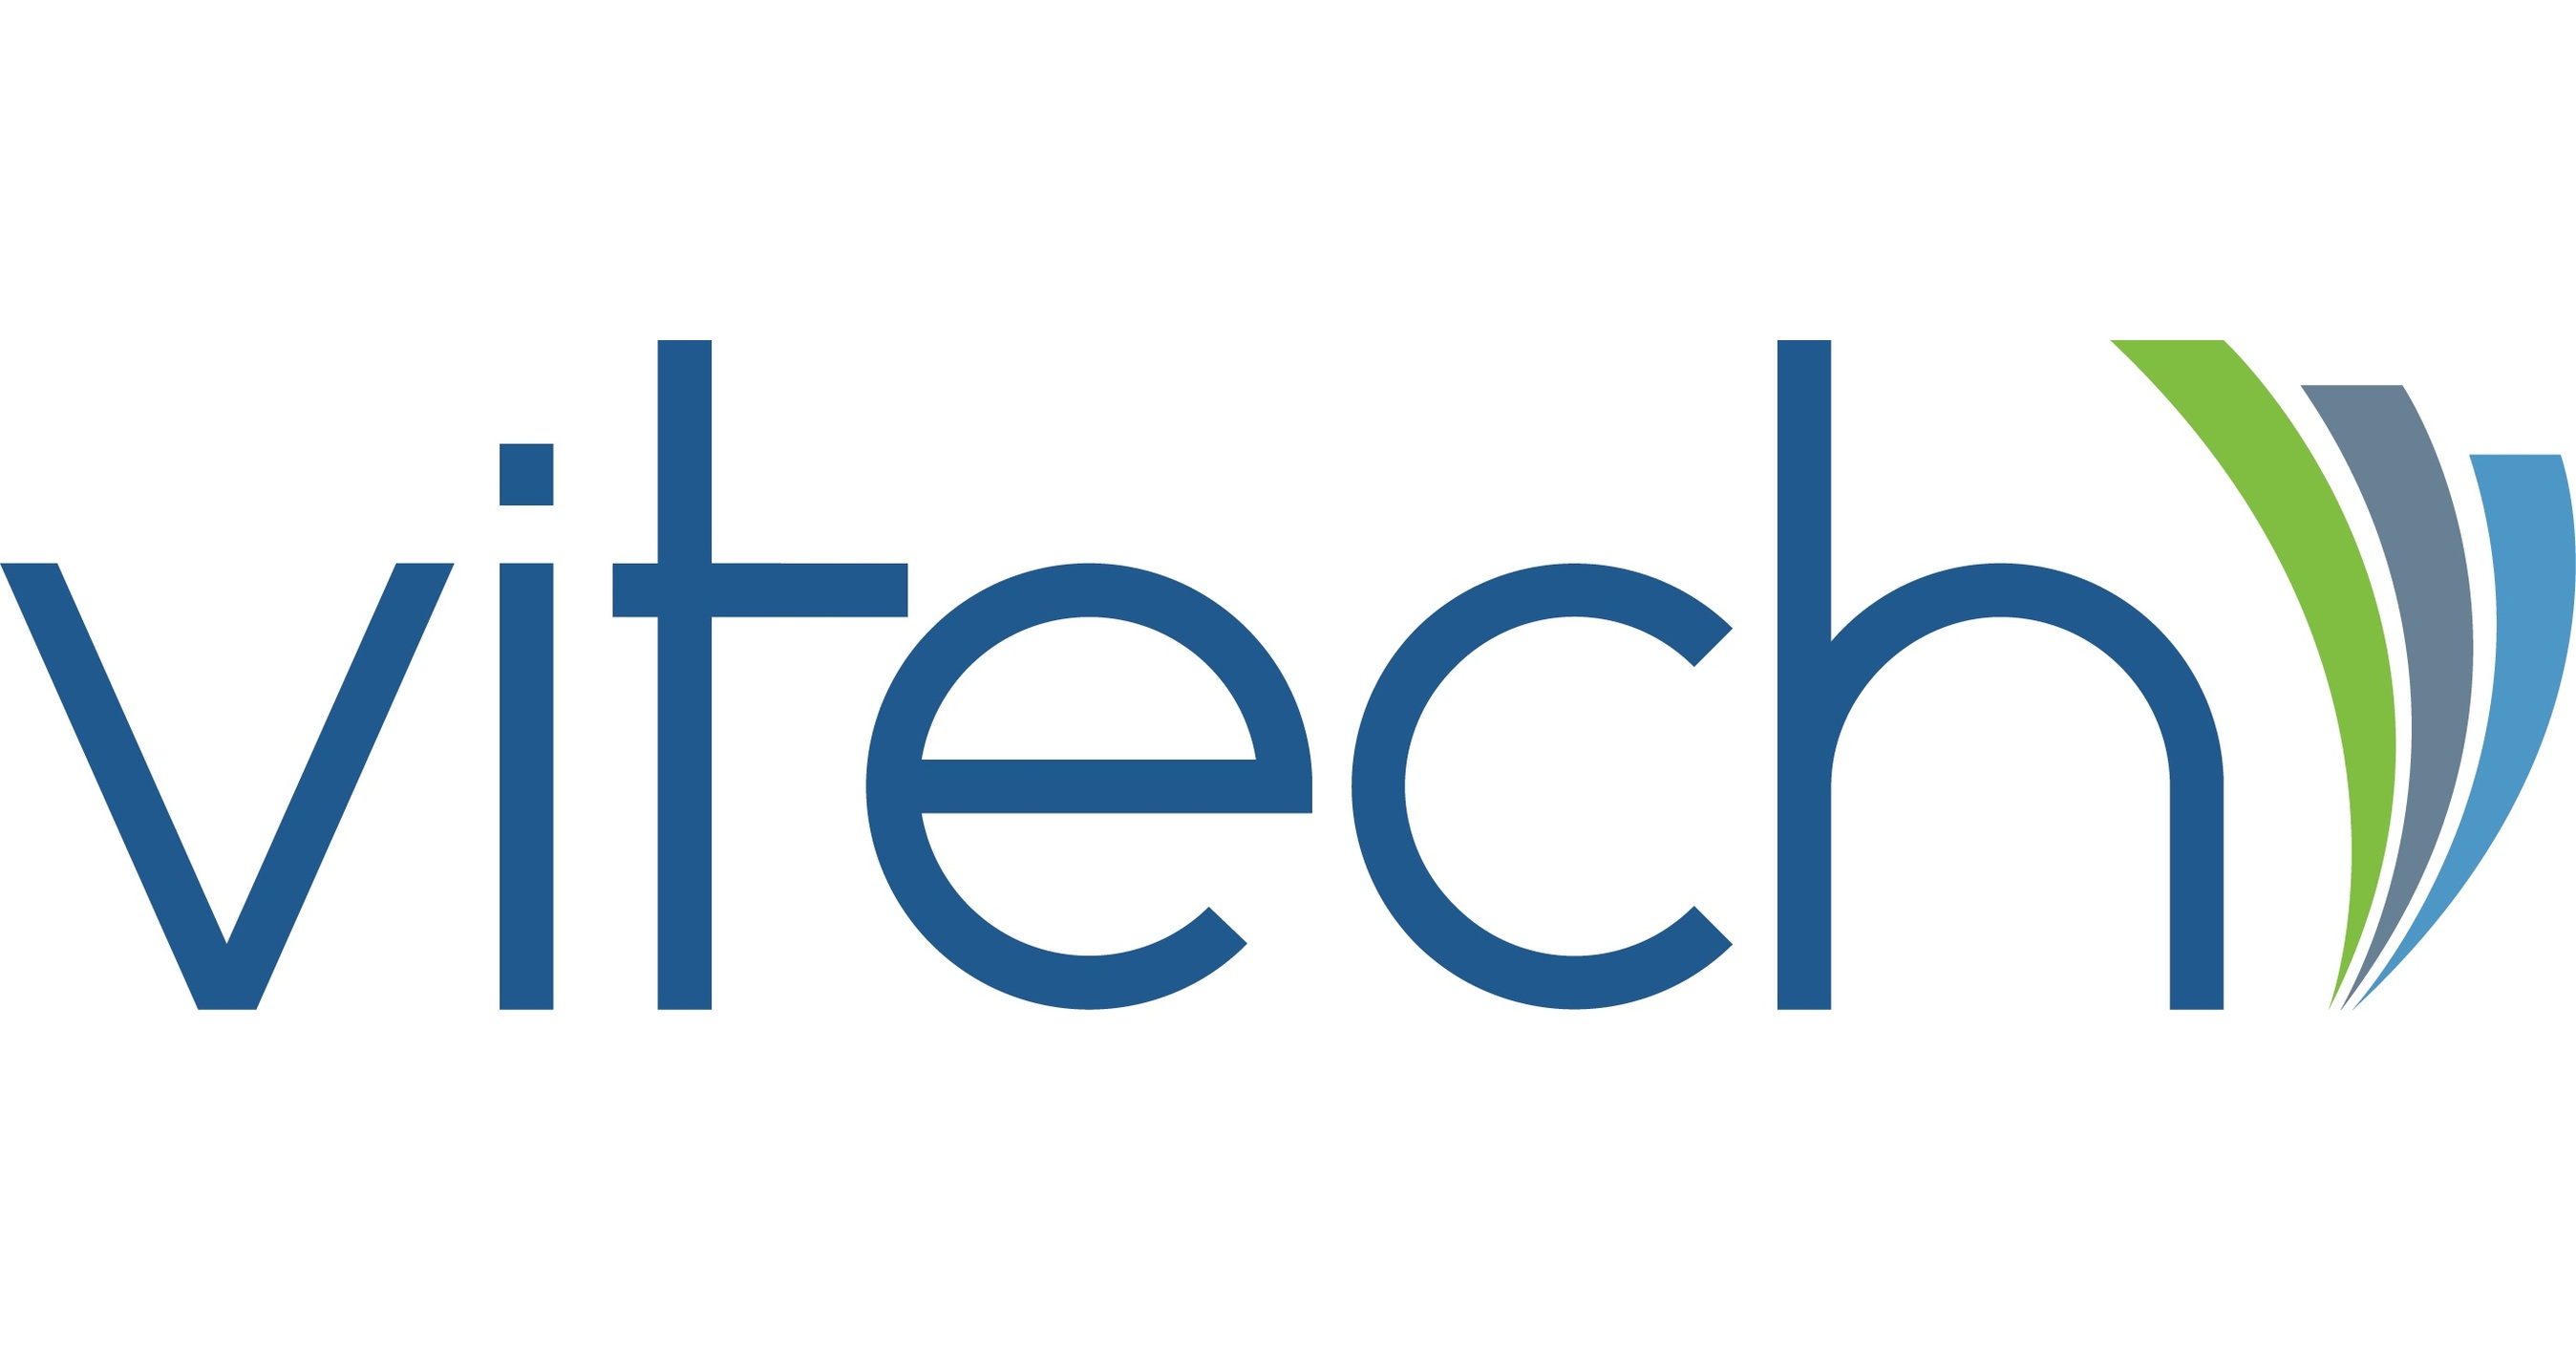 Vitech Releases Fall 2022 V3locity Solution Enhancements, Including Improved Digital Experiences and Workflow Advancements